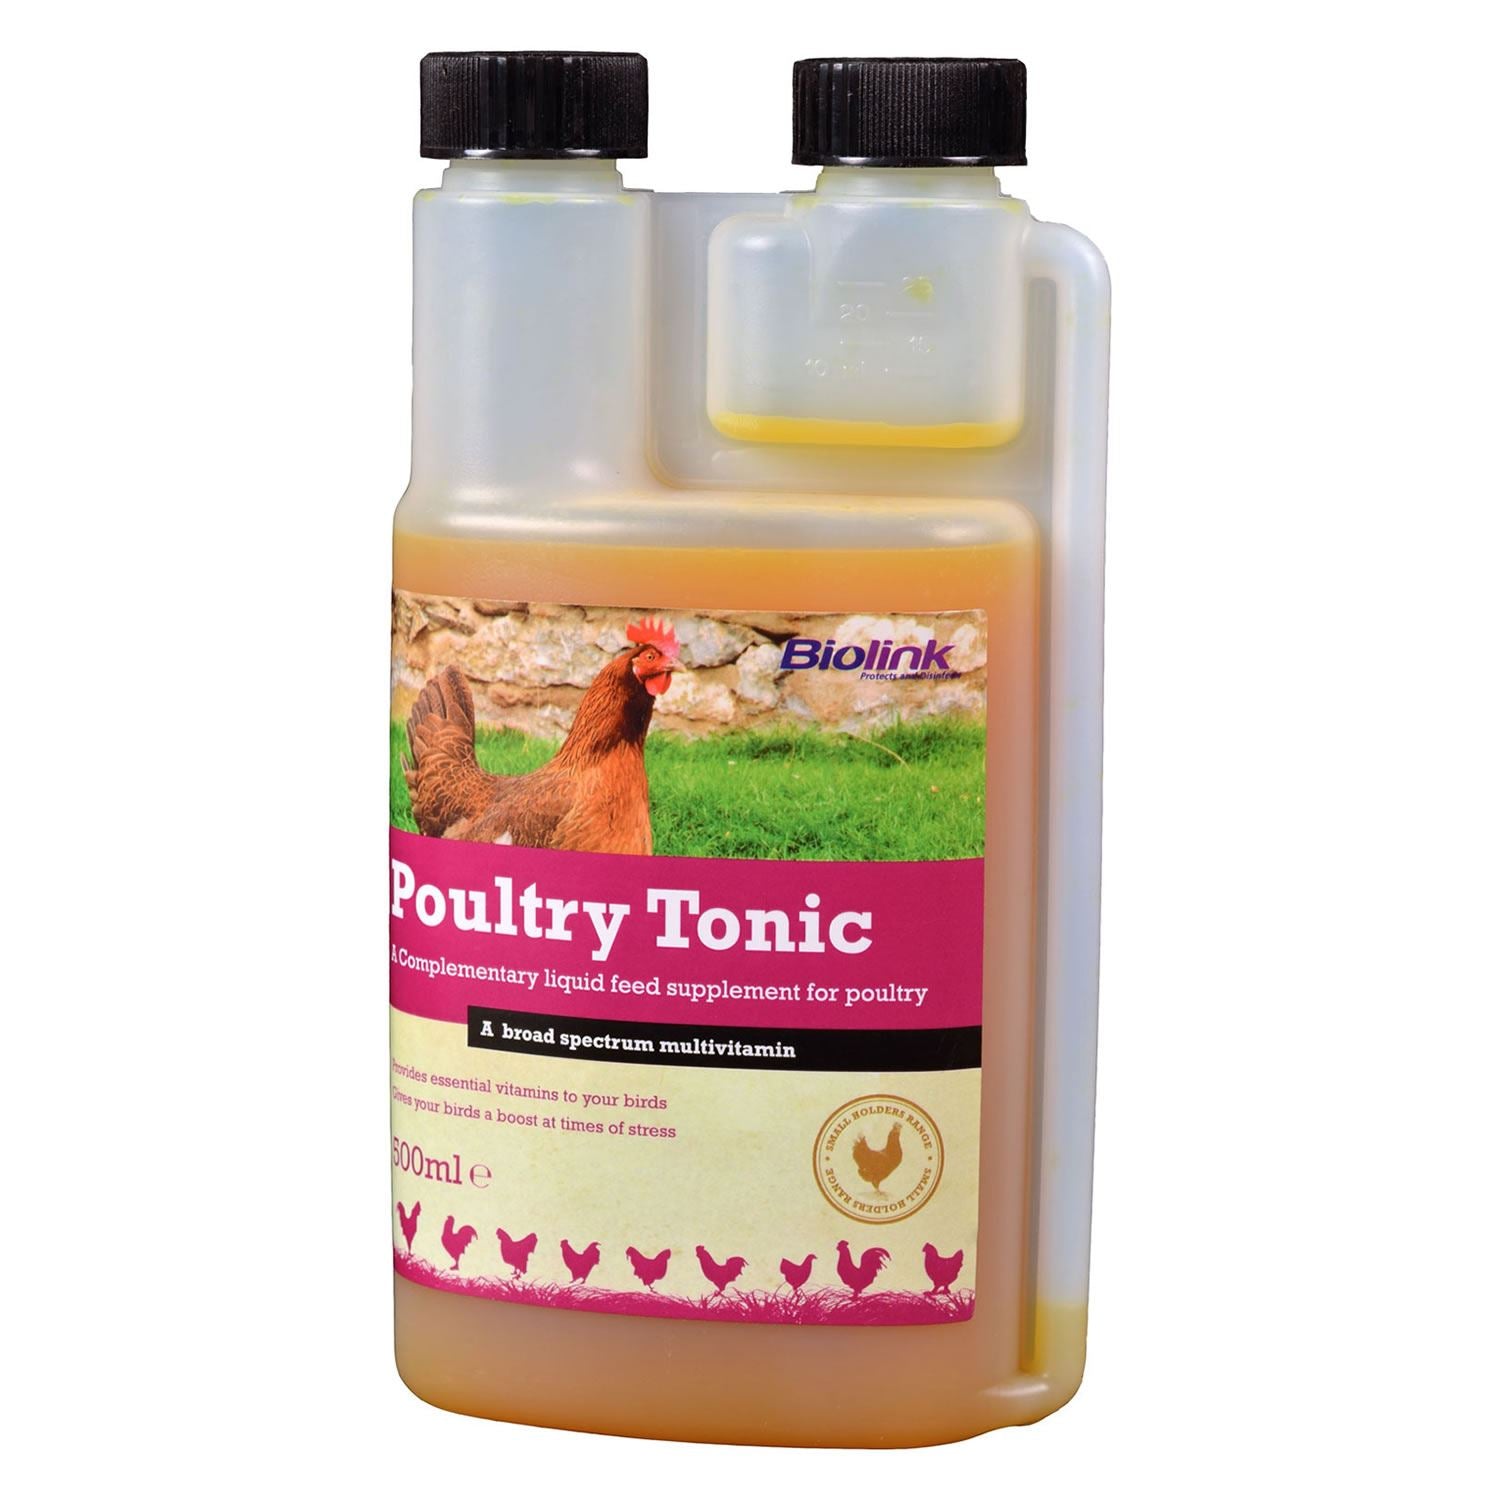 Biolink Poultry Tonic - Just Horse Riders